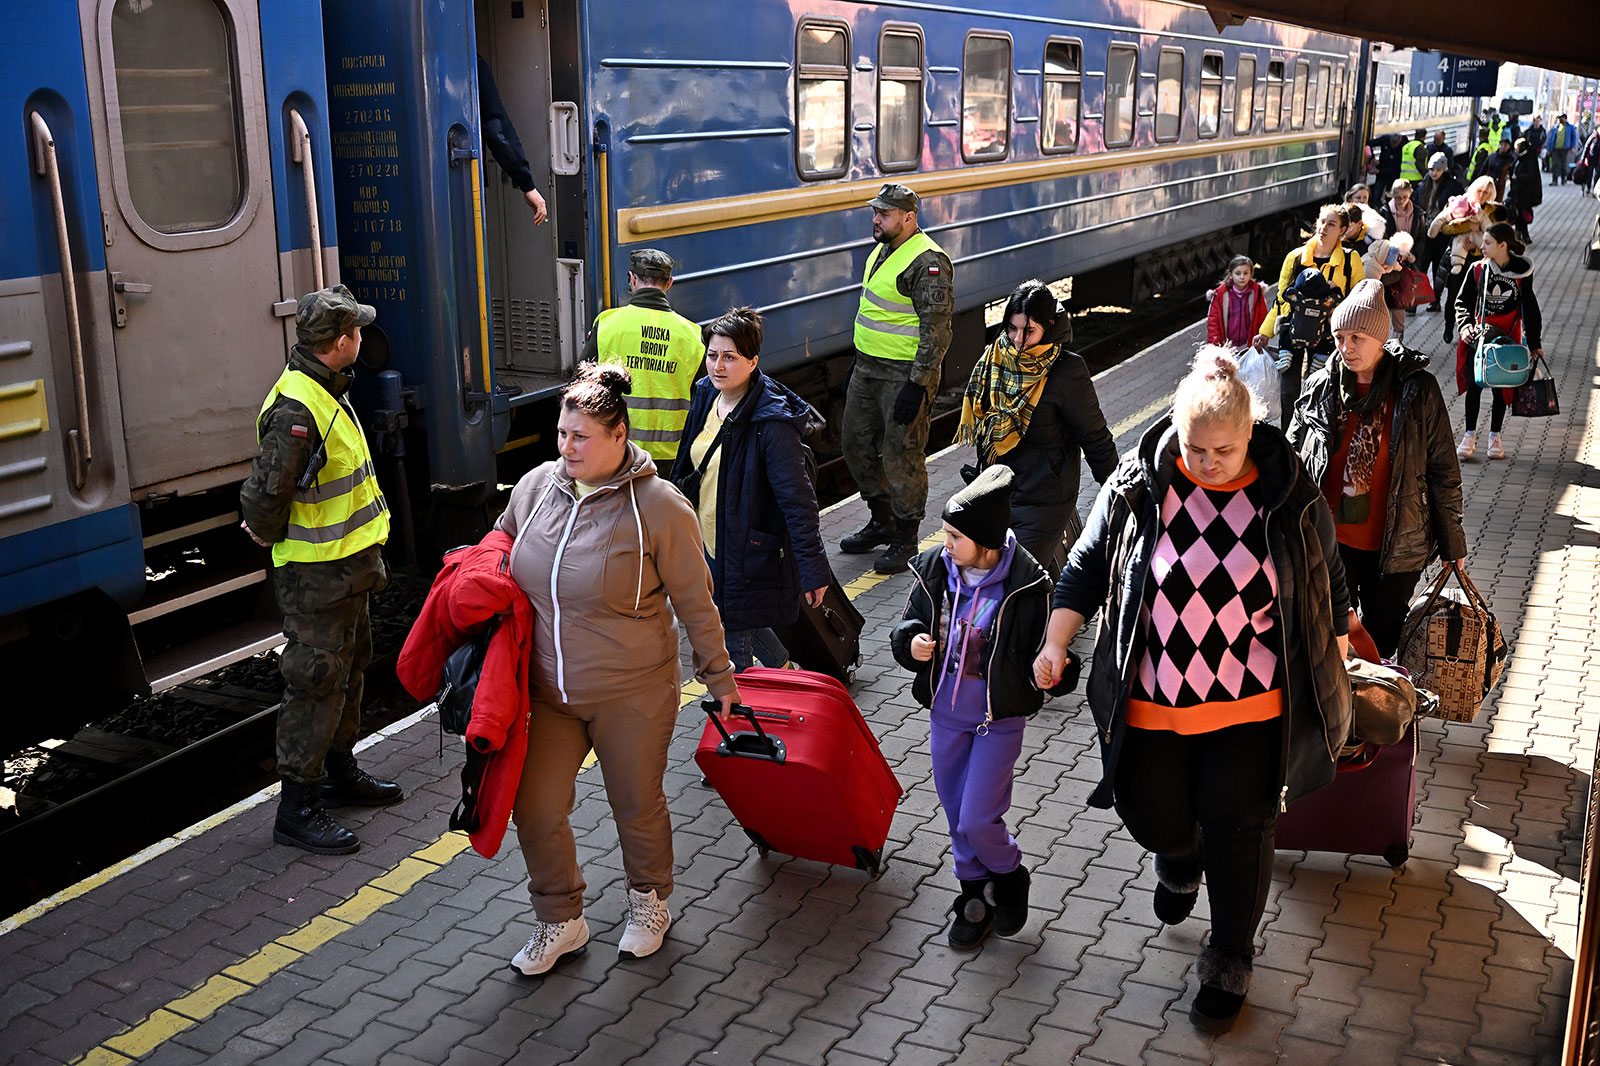 People arrive at a train station in Przemysl, Poland, from Kyiv, Ukraine, on March 20.